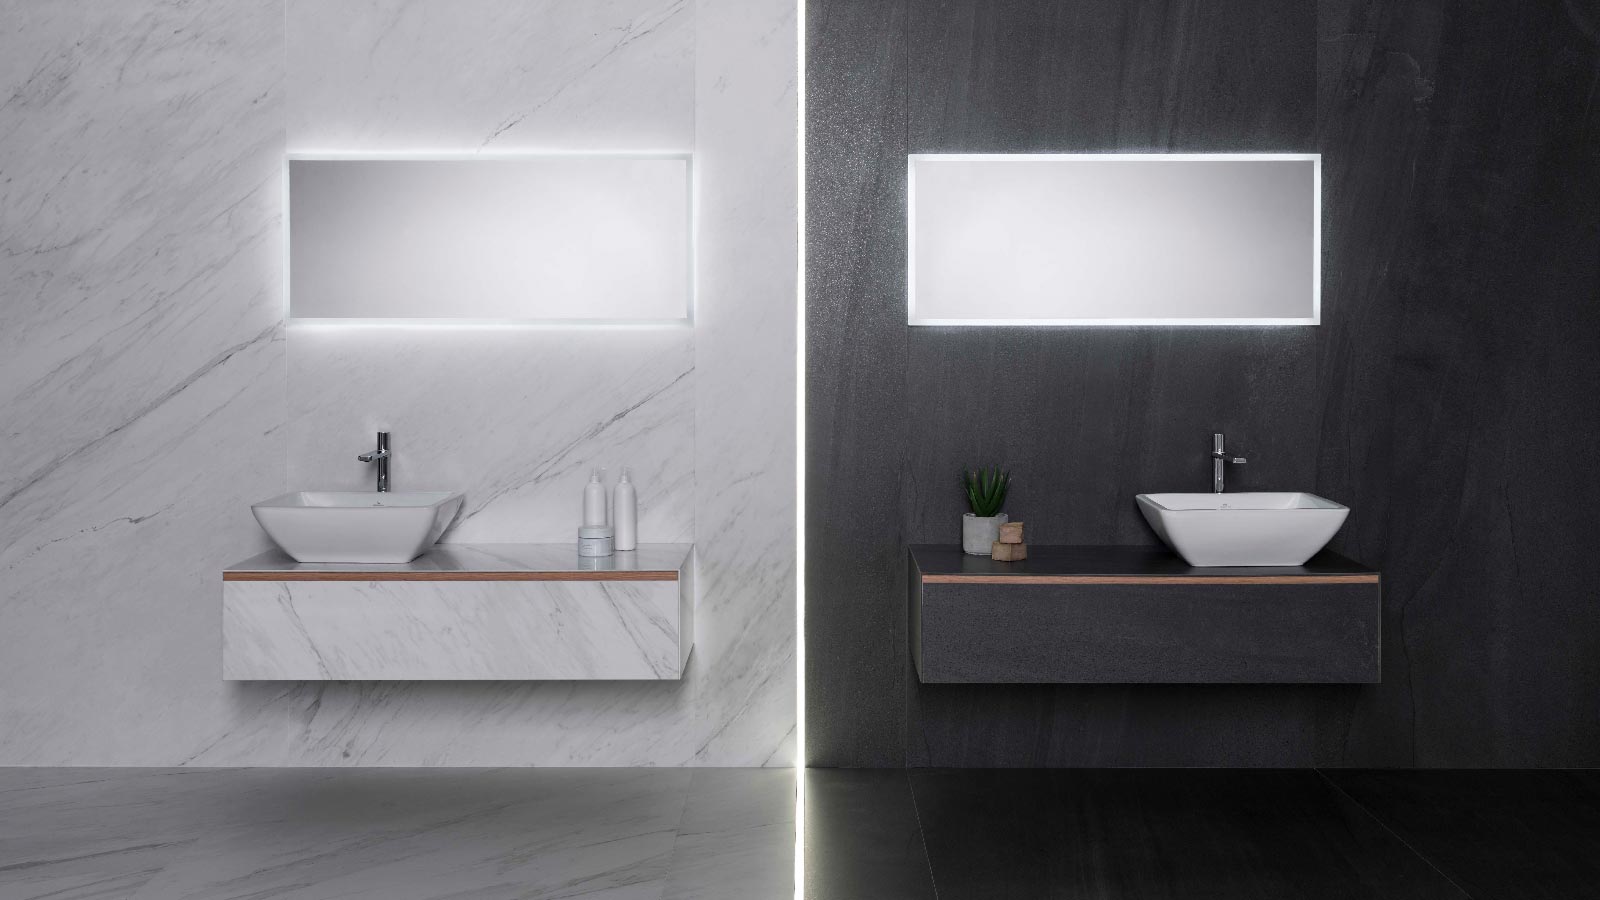 Art and design. Seven sculptured pieces from the PORCELANOSA Group